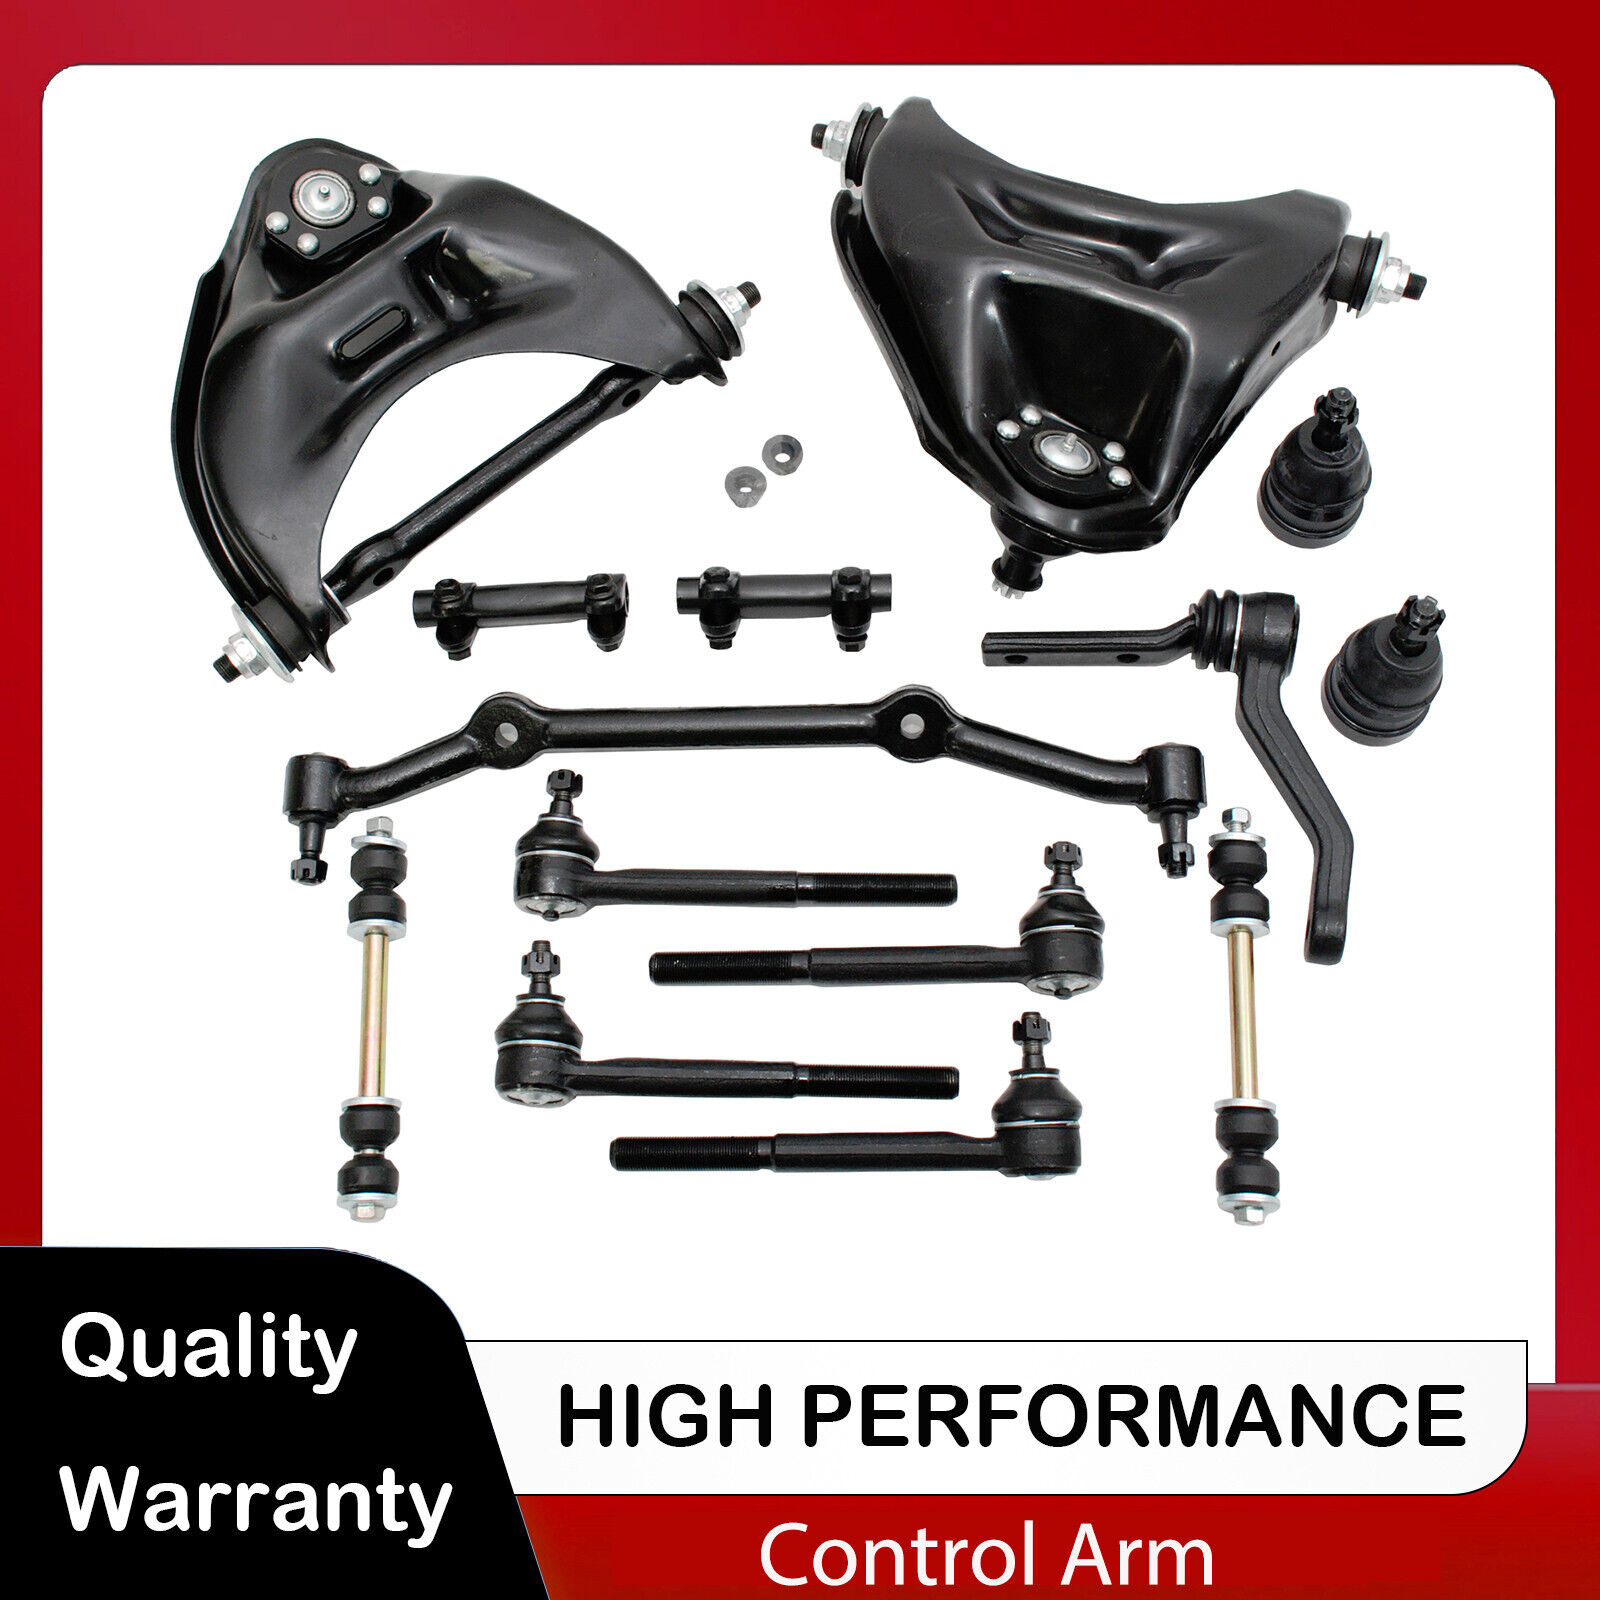 2WD 14pcs Front Suspension Kit for Chevy Blazer S10 GMC Jimmy Sonoma 1996-2005